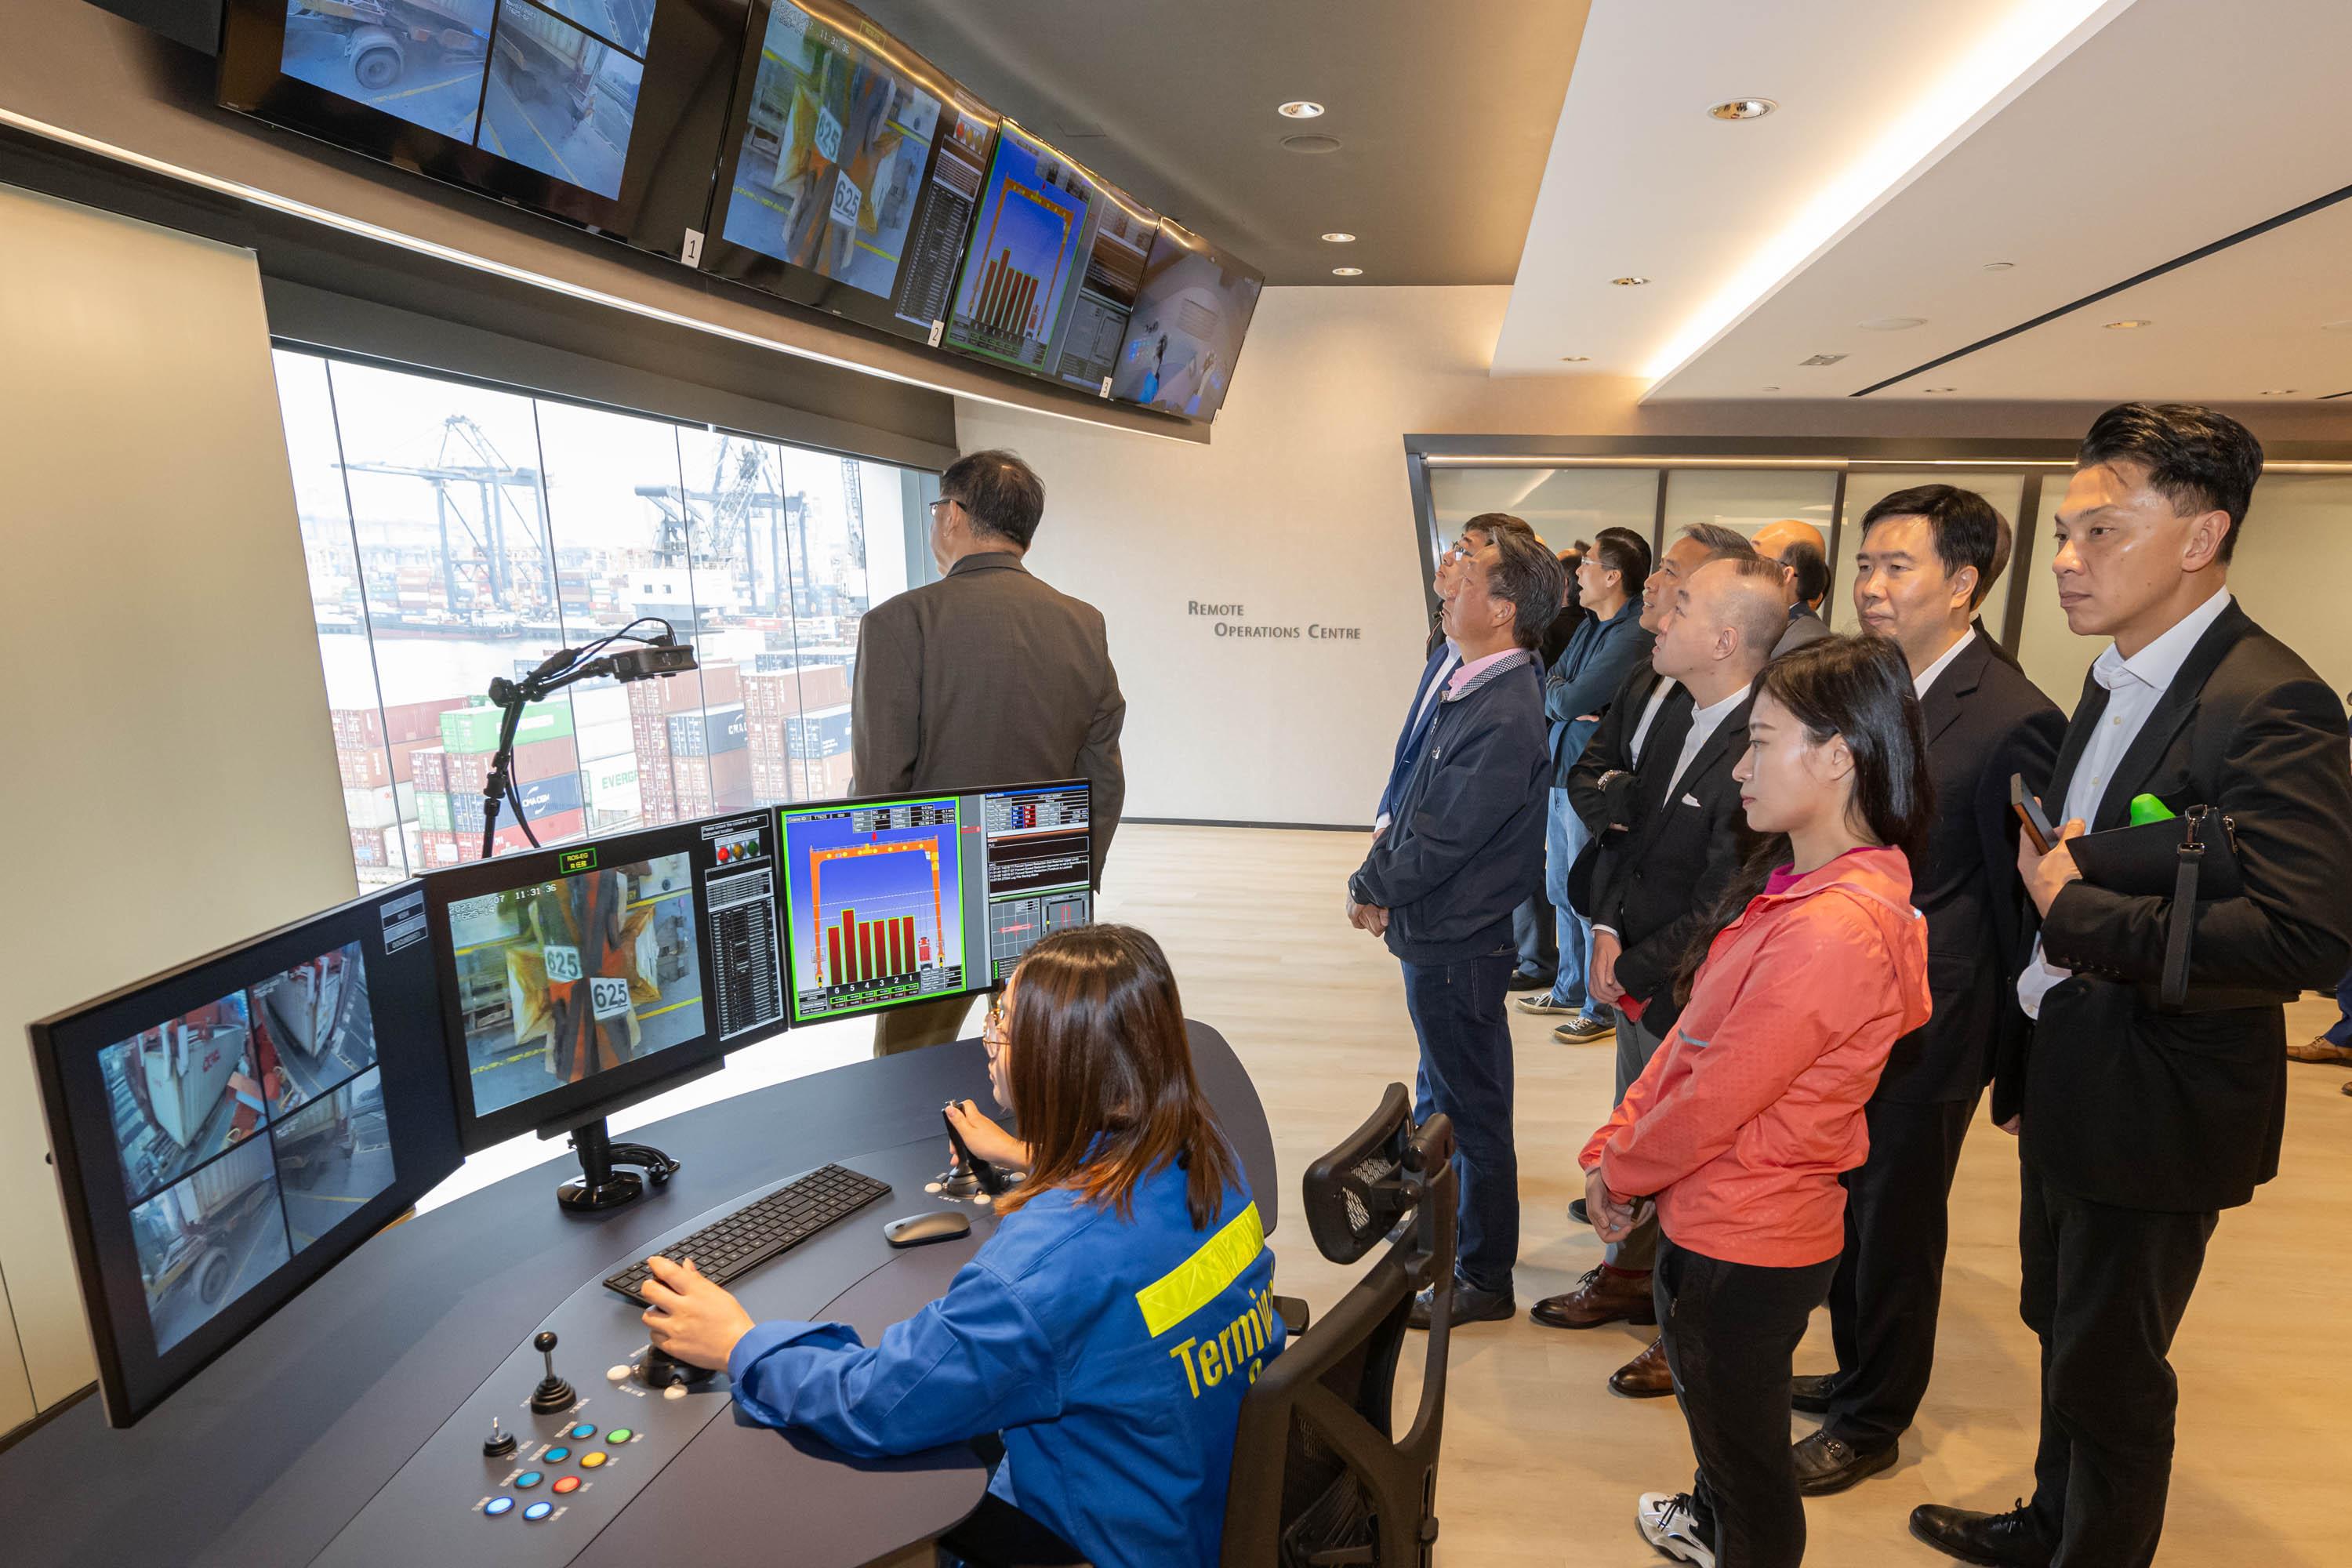 The Legislative Council (LegCo) Panel on Economic Development visited the Kwai Tsing Container Terminals (KTCT) today (November 7) to further understand the latest developments of the terminals' digital operations and the logistics industry. Photo shows the LegCo Members observing the remote-control cranes operation at the operation centre.